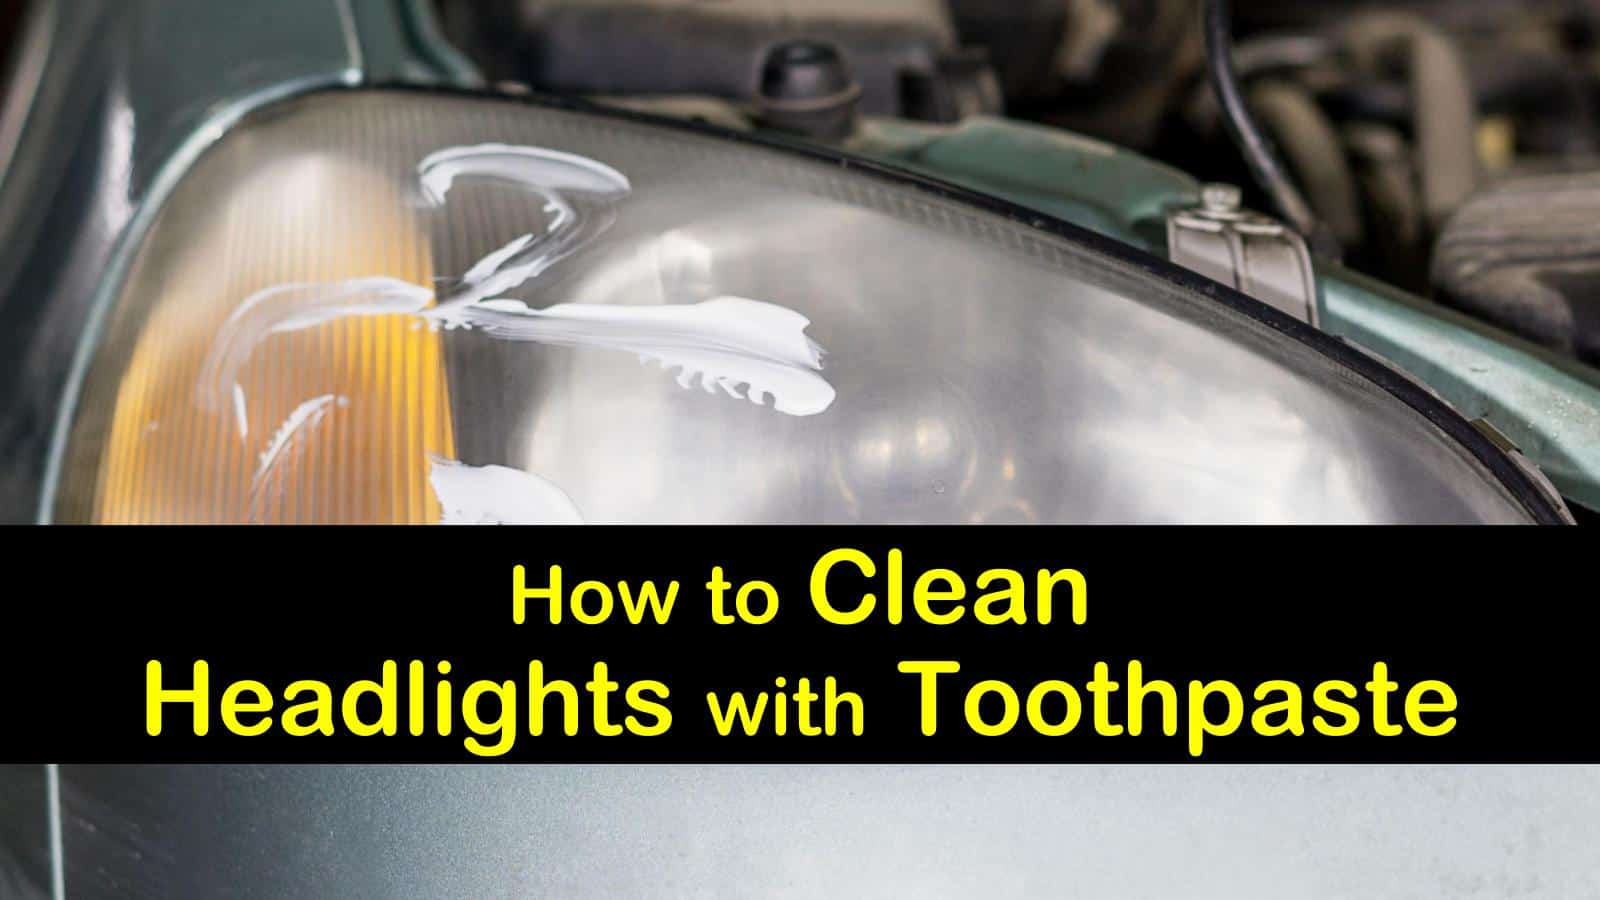 How to Clean Headlights with Toothpaste